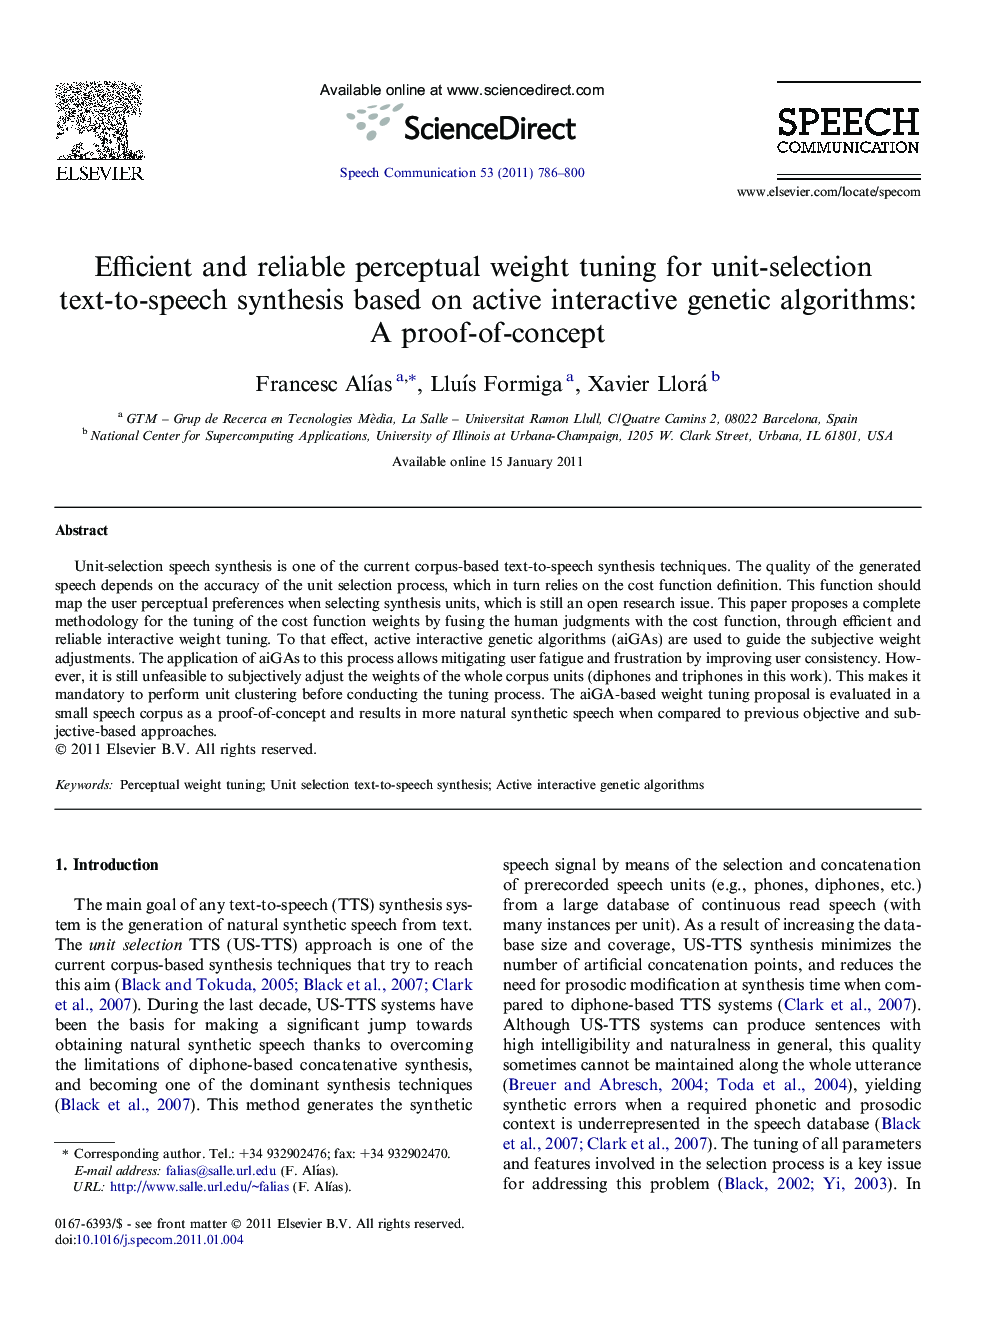 Efficient and reliable perceptual weight tuning for unit-selection text-to-speech synthesis based on active interactive genetic algorithms: A proof-of-concept